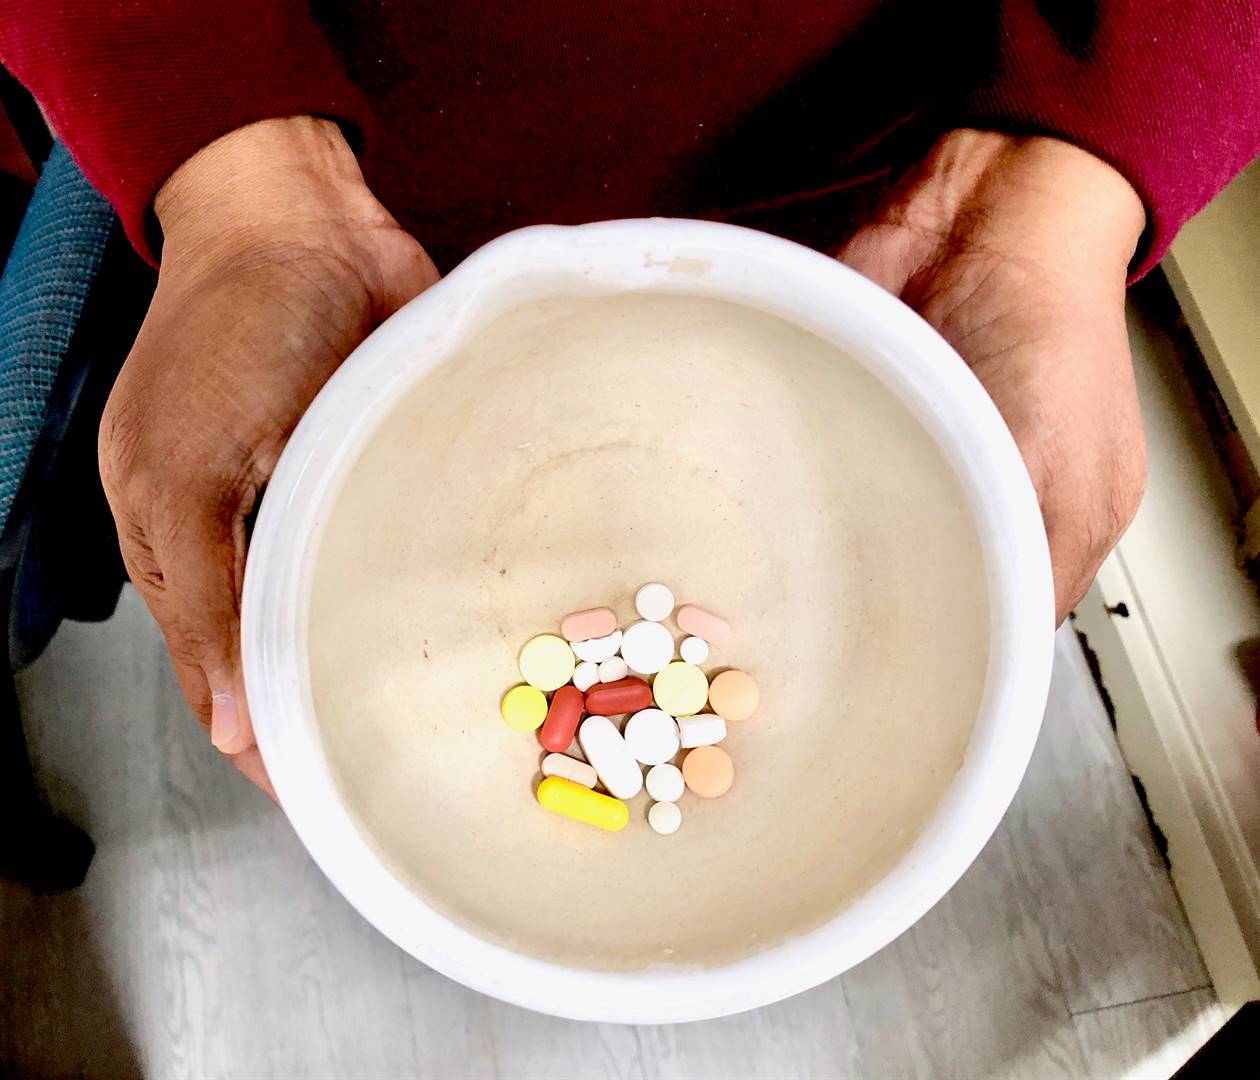 Some tuberculosis patients in South Africa are still required to take their pills in front of a healthcare worker or family member. Picture: Kathryn Cleary